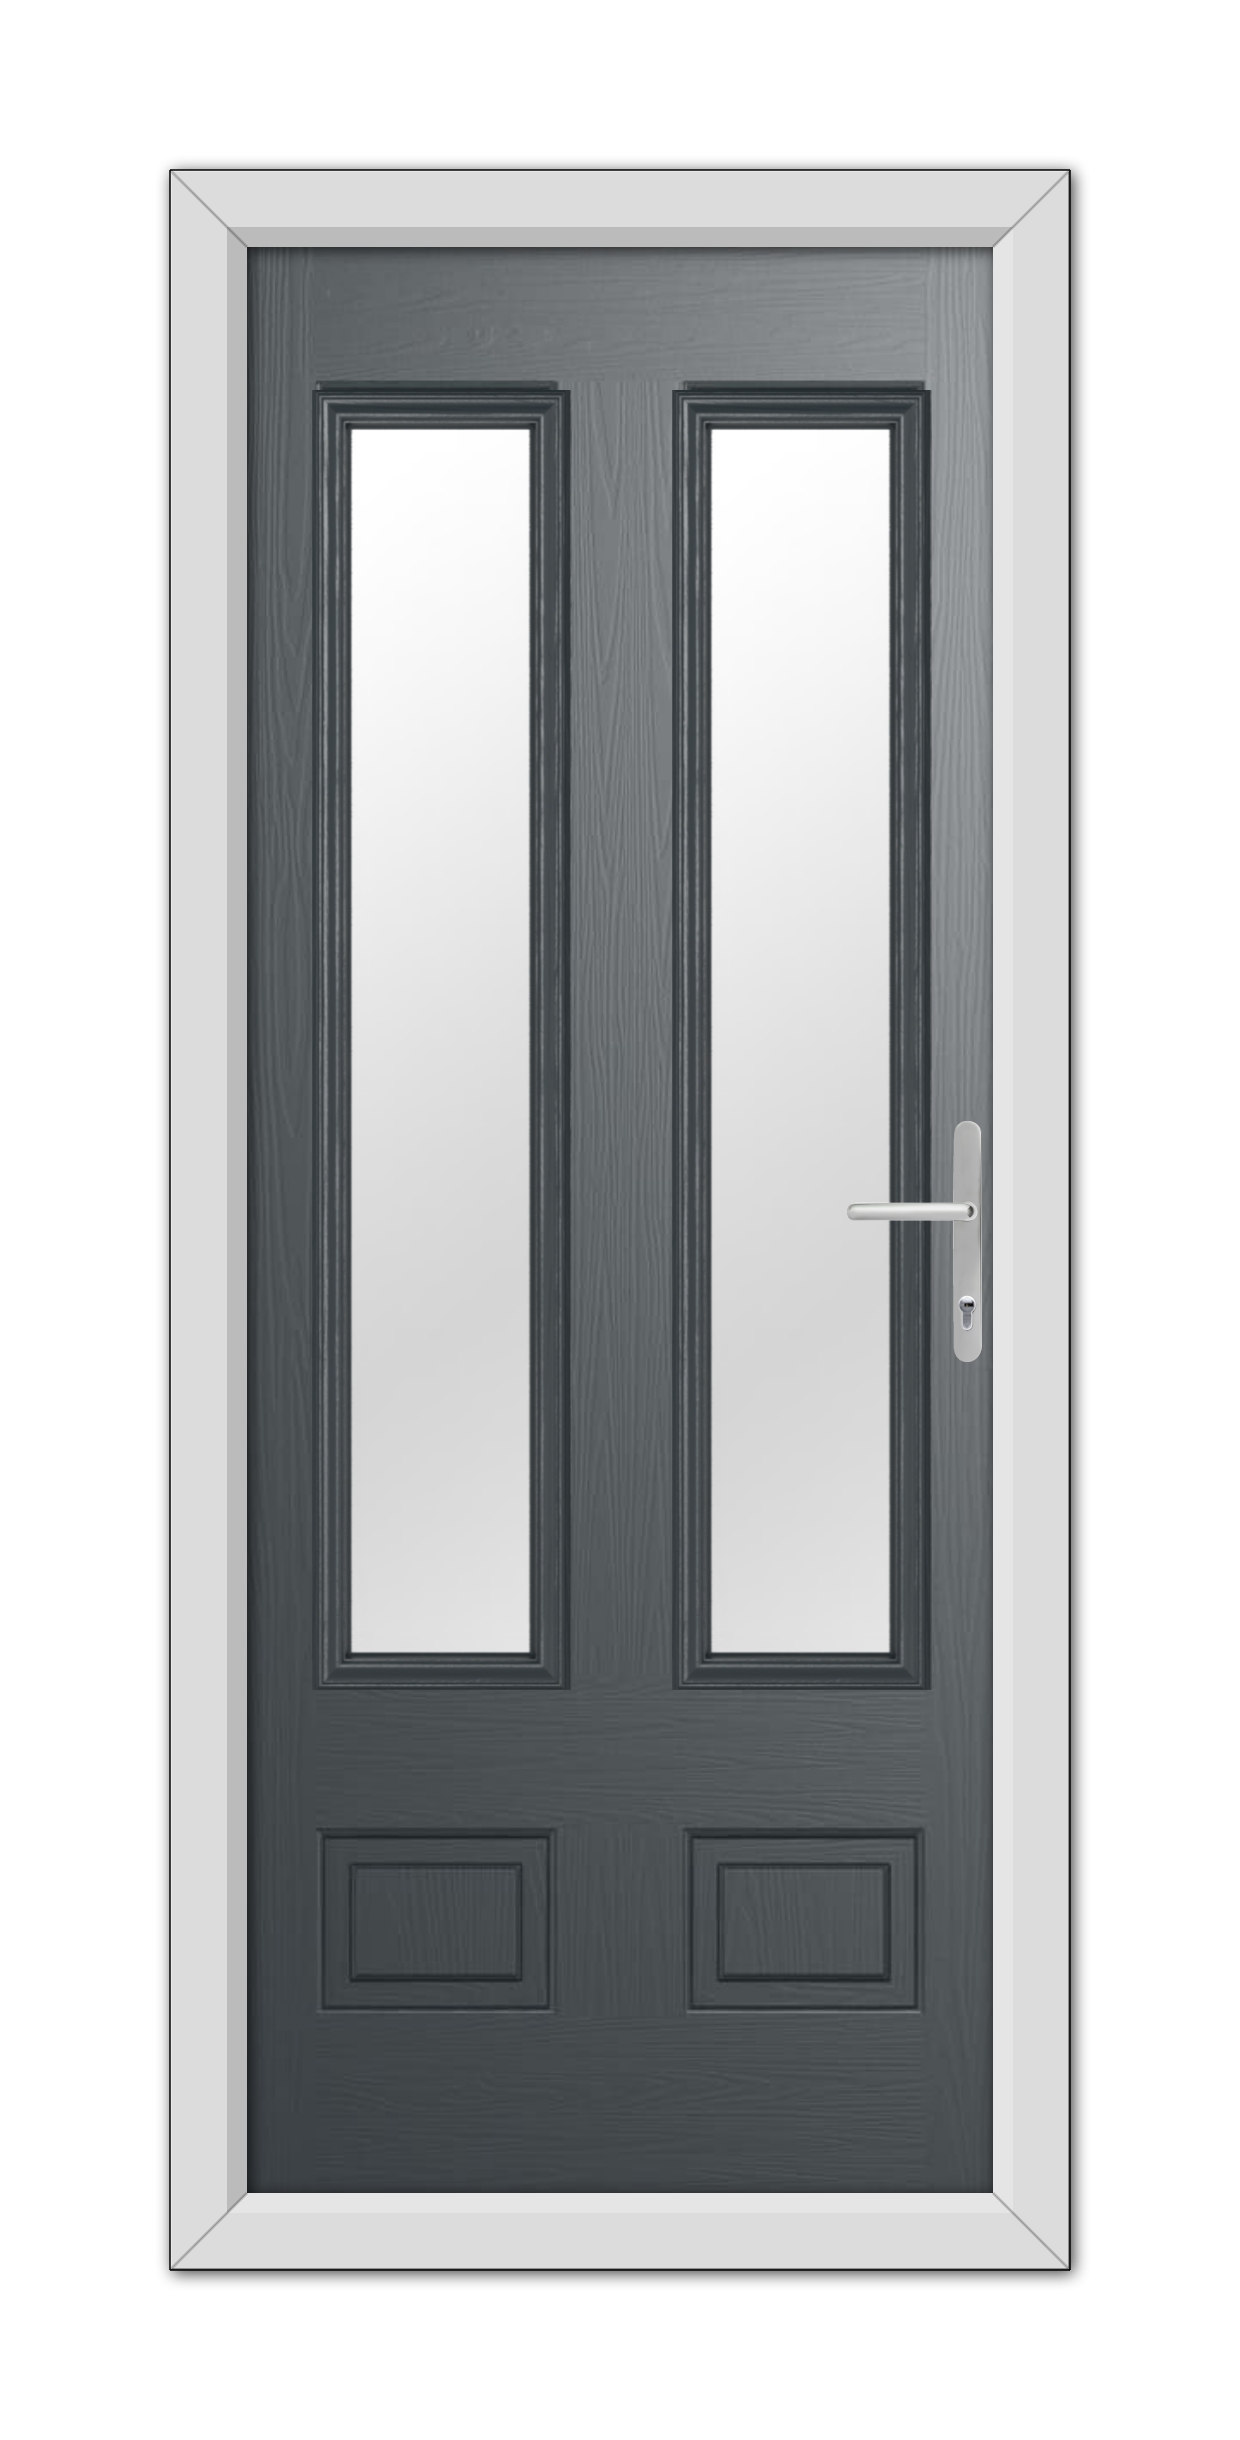 Double door with a modern design, featuring vertical rectangular windows and a handle on the right door, all set within a white frame. Anthracite Grey Aston Glazed 2 Composite Door 48mm Timber Core